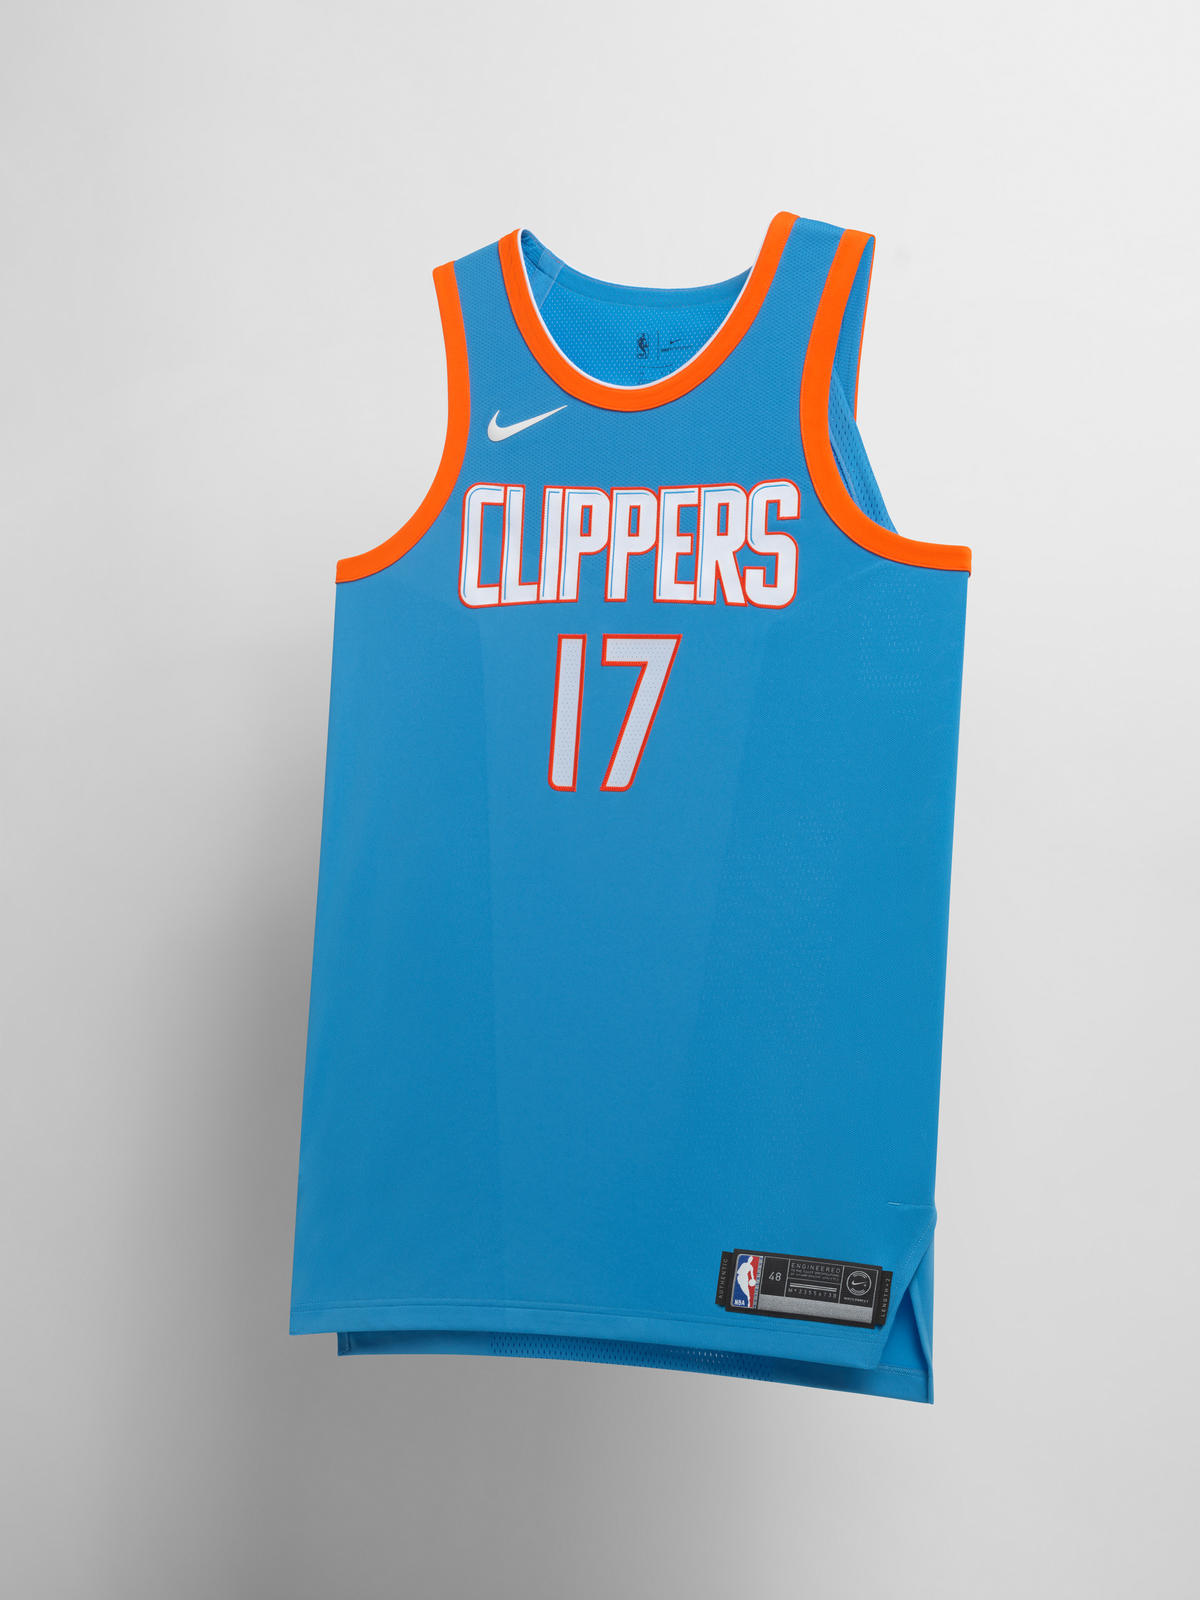 Nike Unveils New NBA City Edition Jerseys - WearTesters